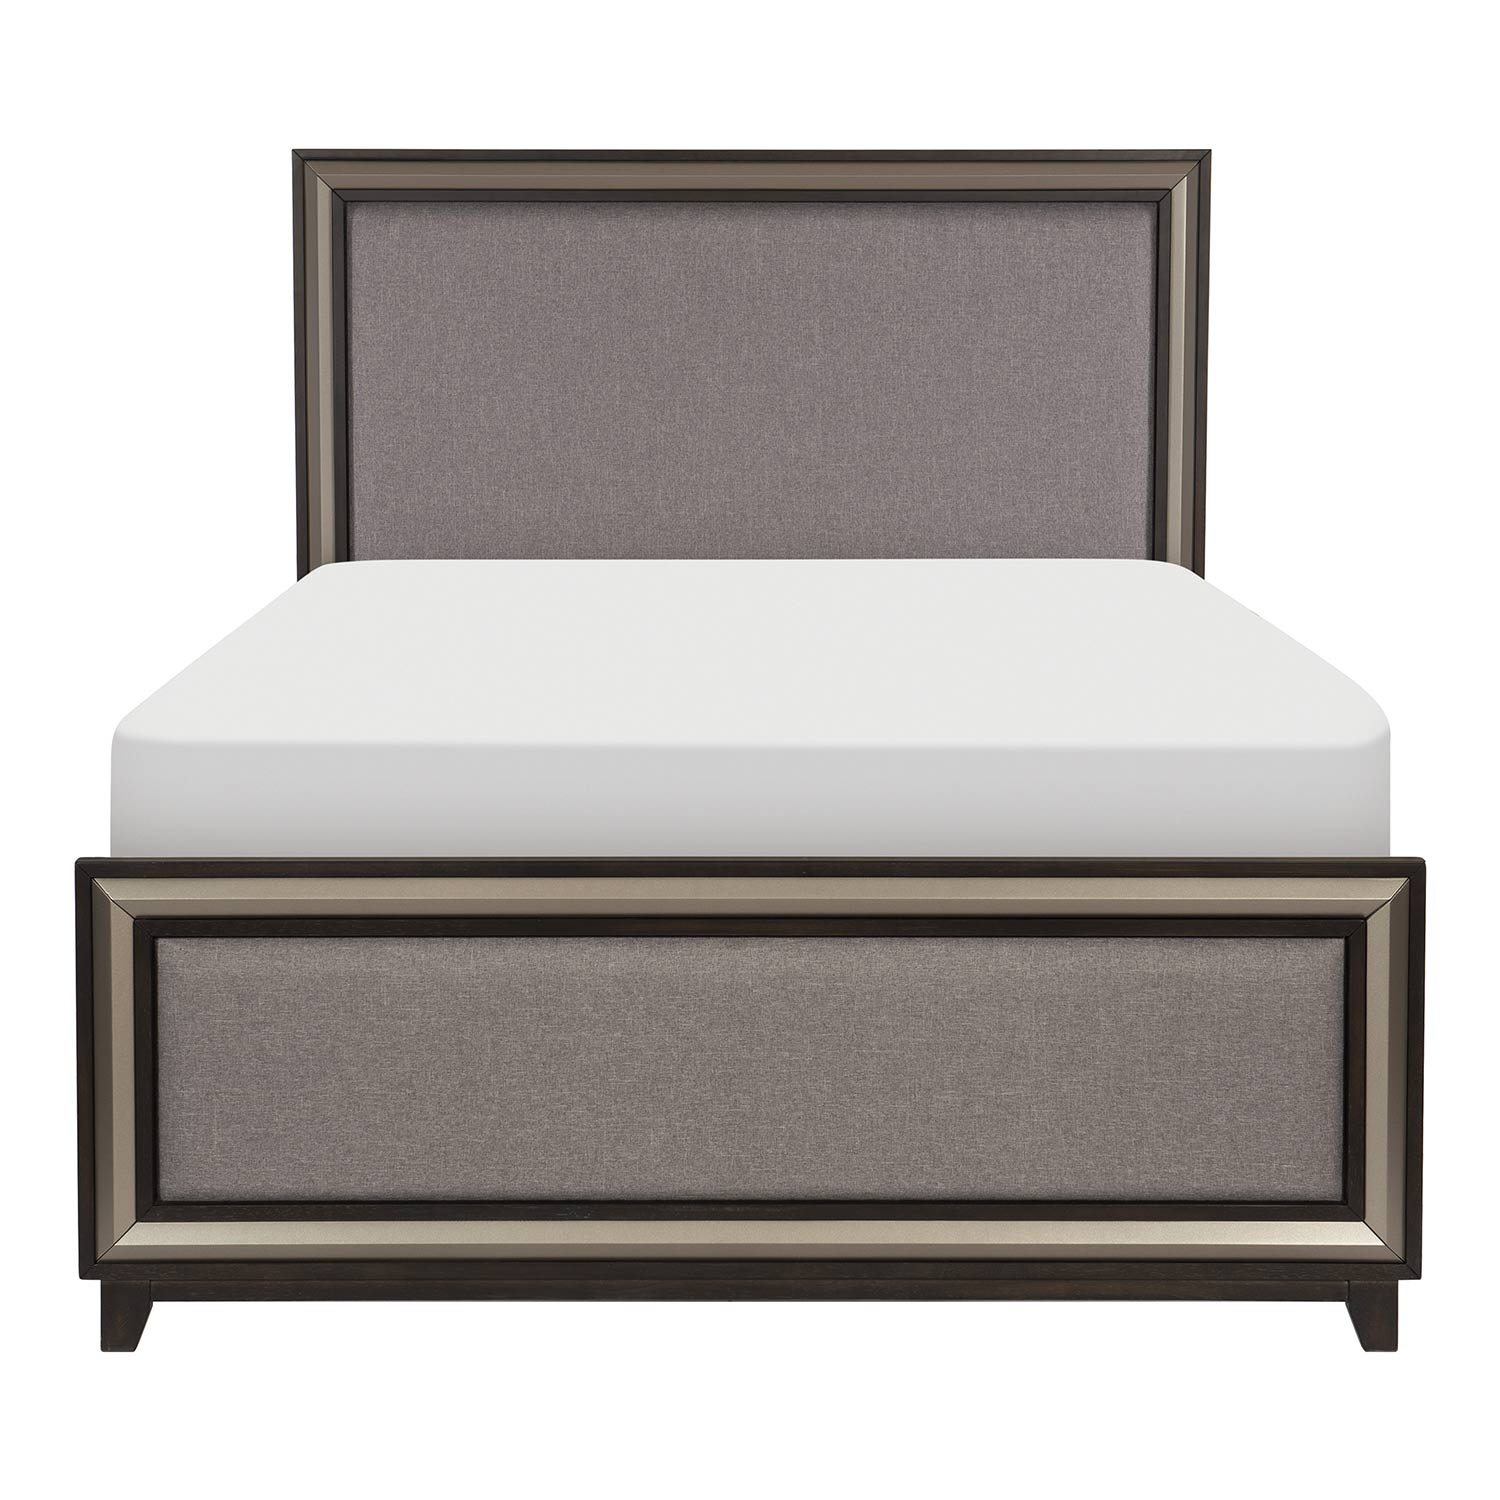 Homelegance Grant Bed - Ebony and Silver